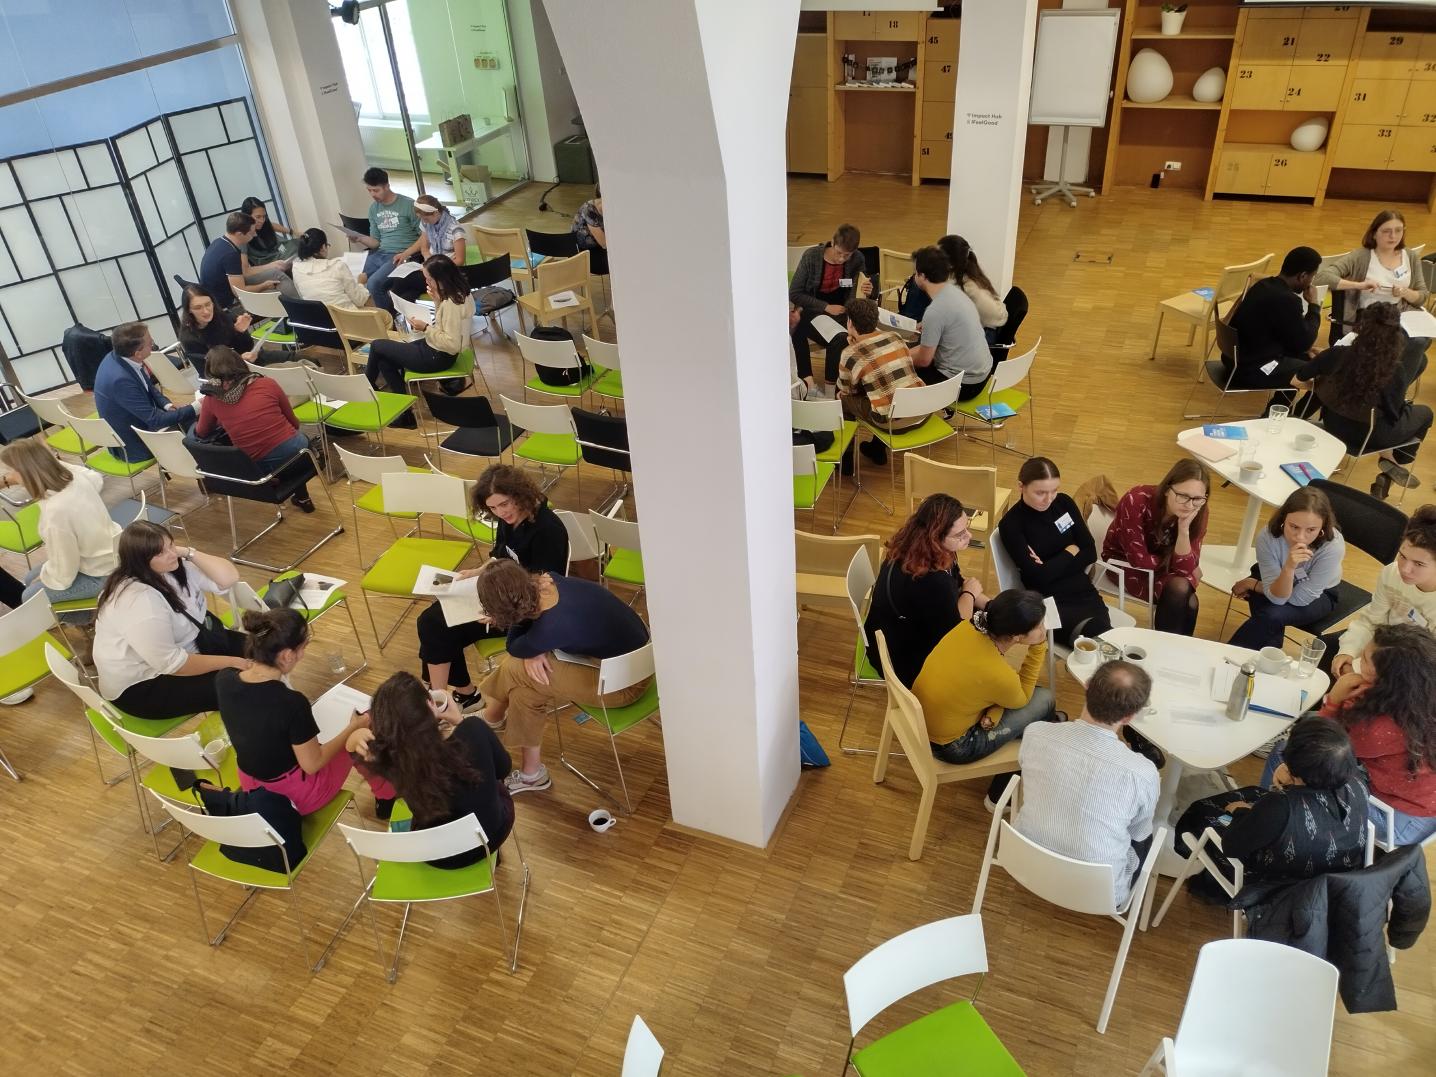 Overview of room full of chairs, people in small groups